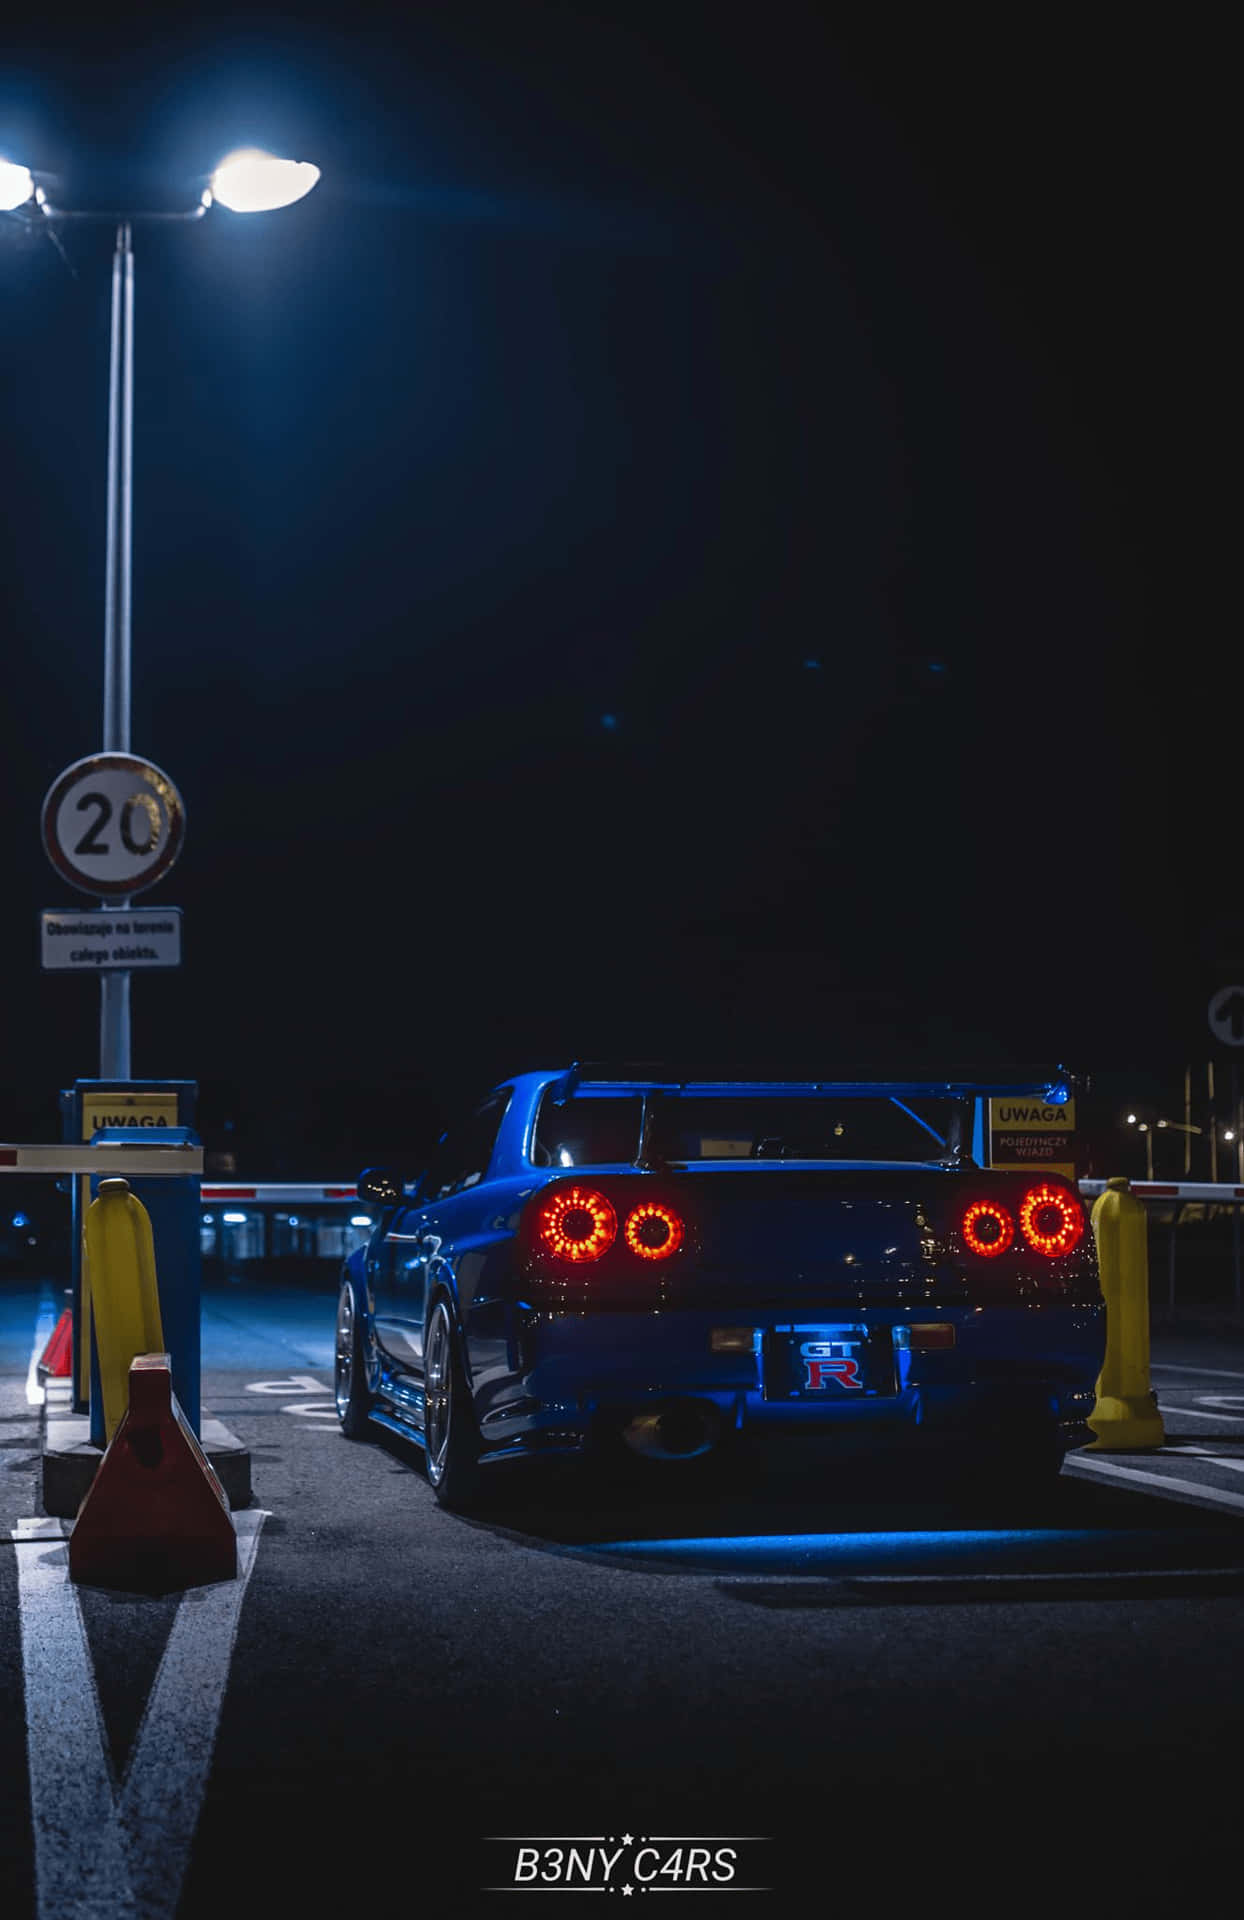 A Blue Sports Car Parked In A Parking Lot At Night Wallpaper